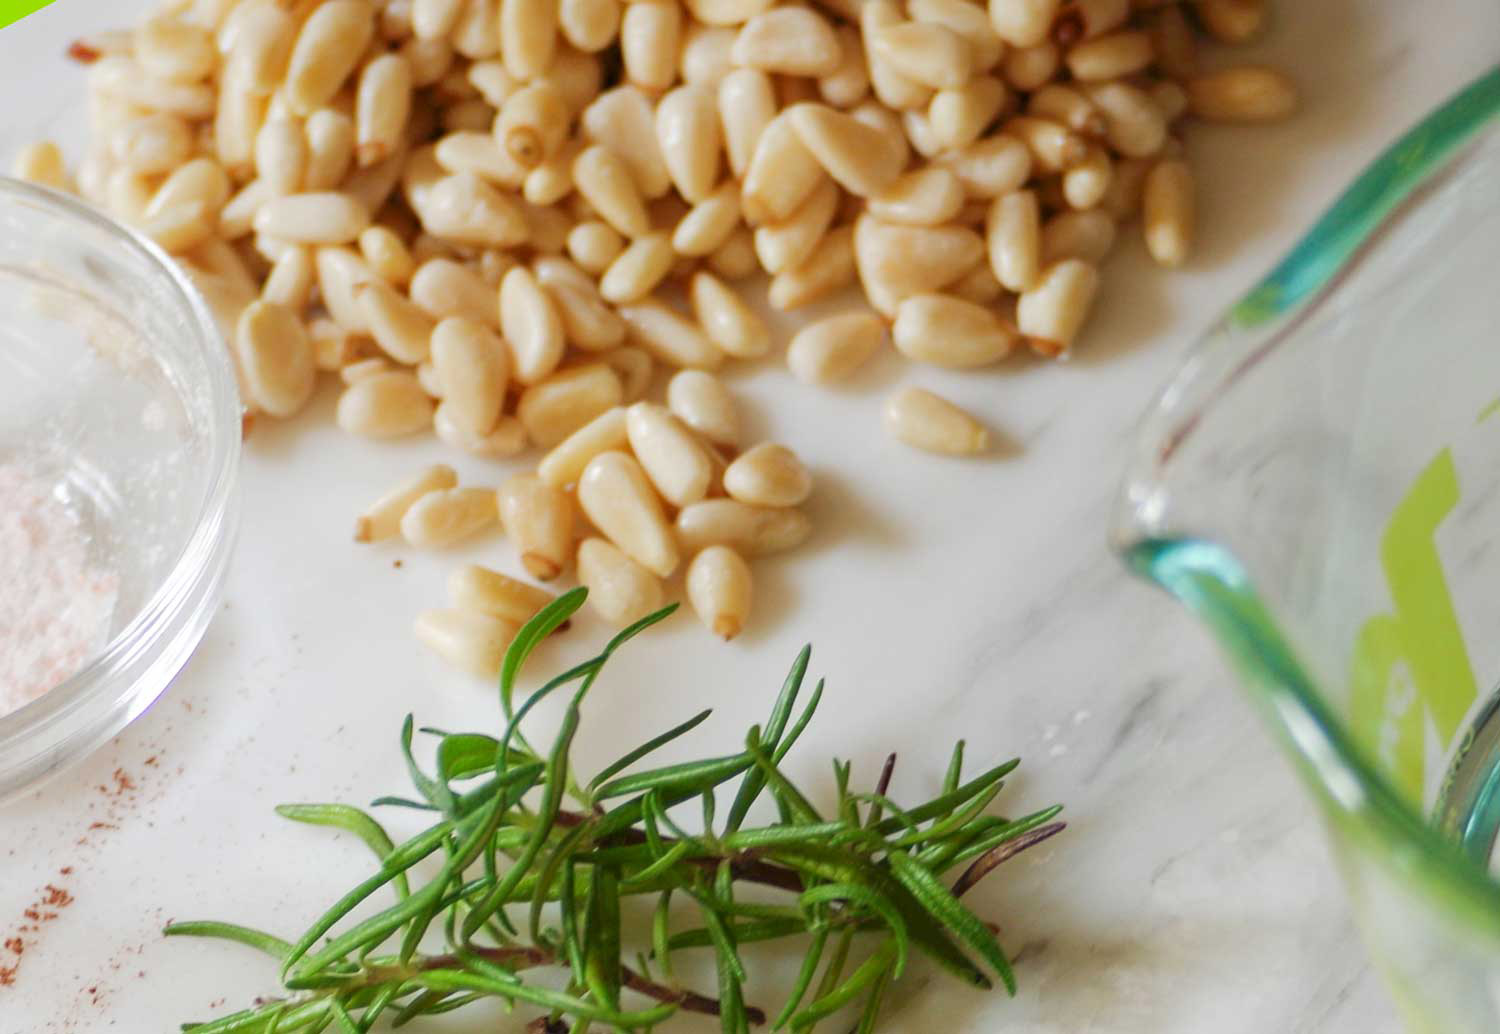 Rosemary and pine nuts for chocolate truffles.